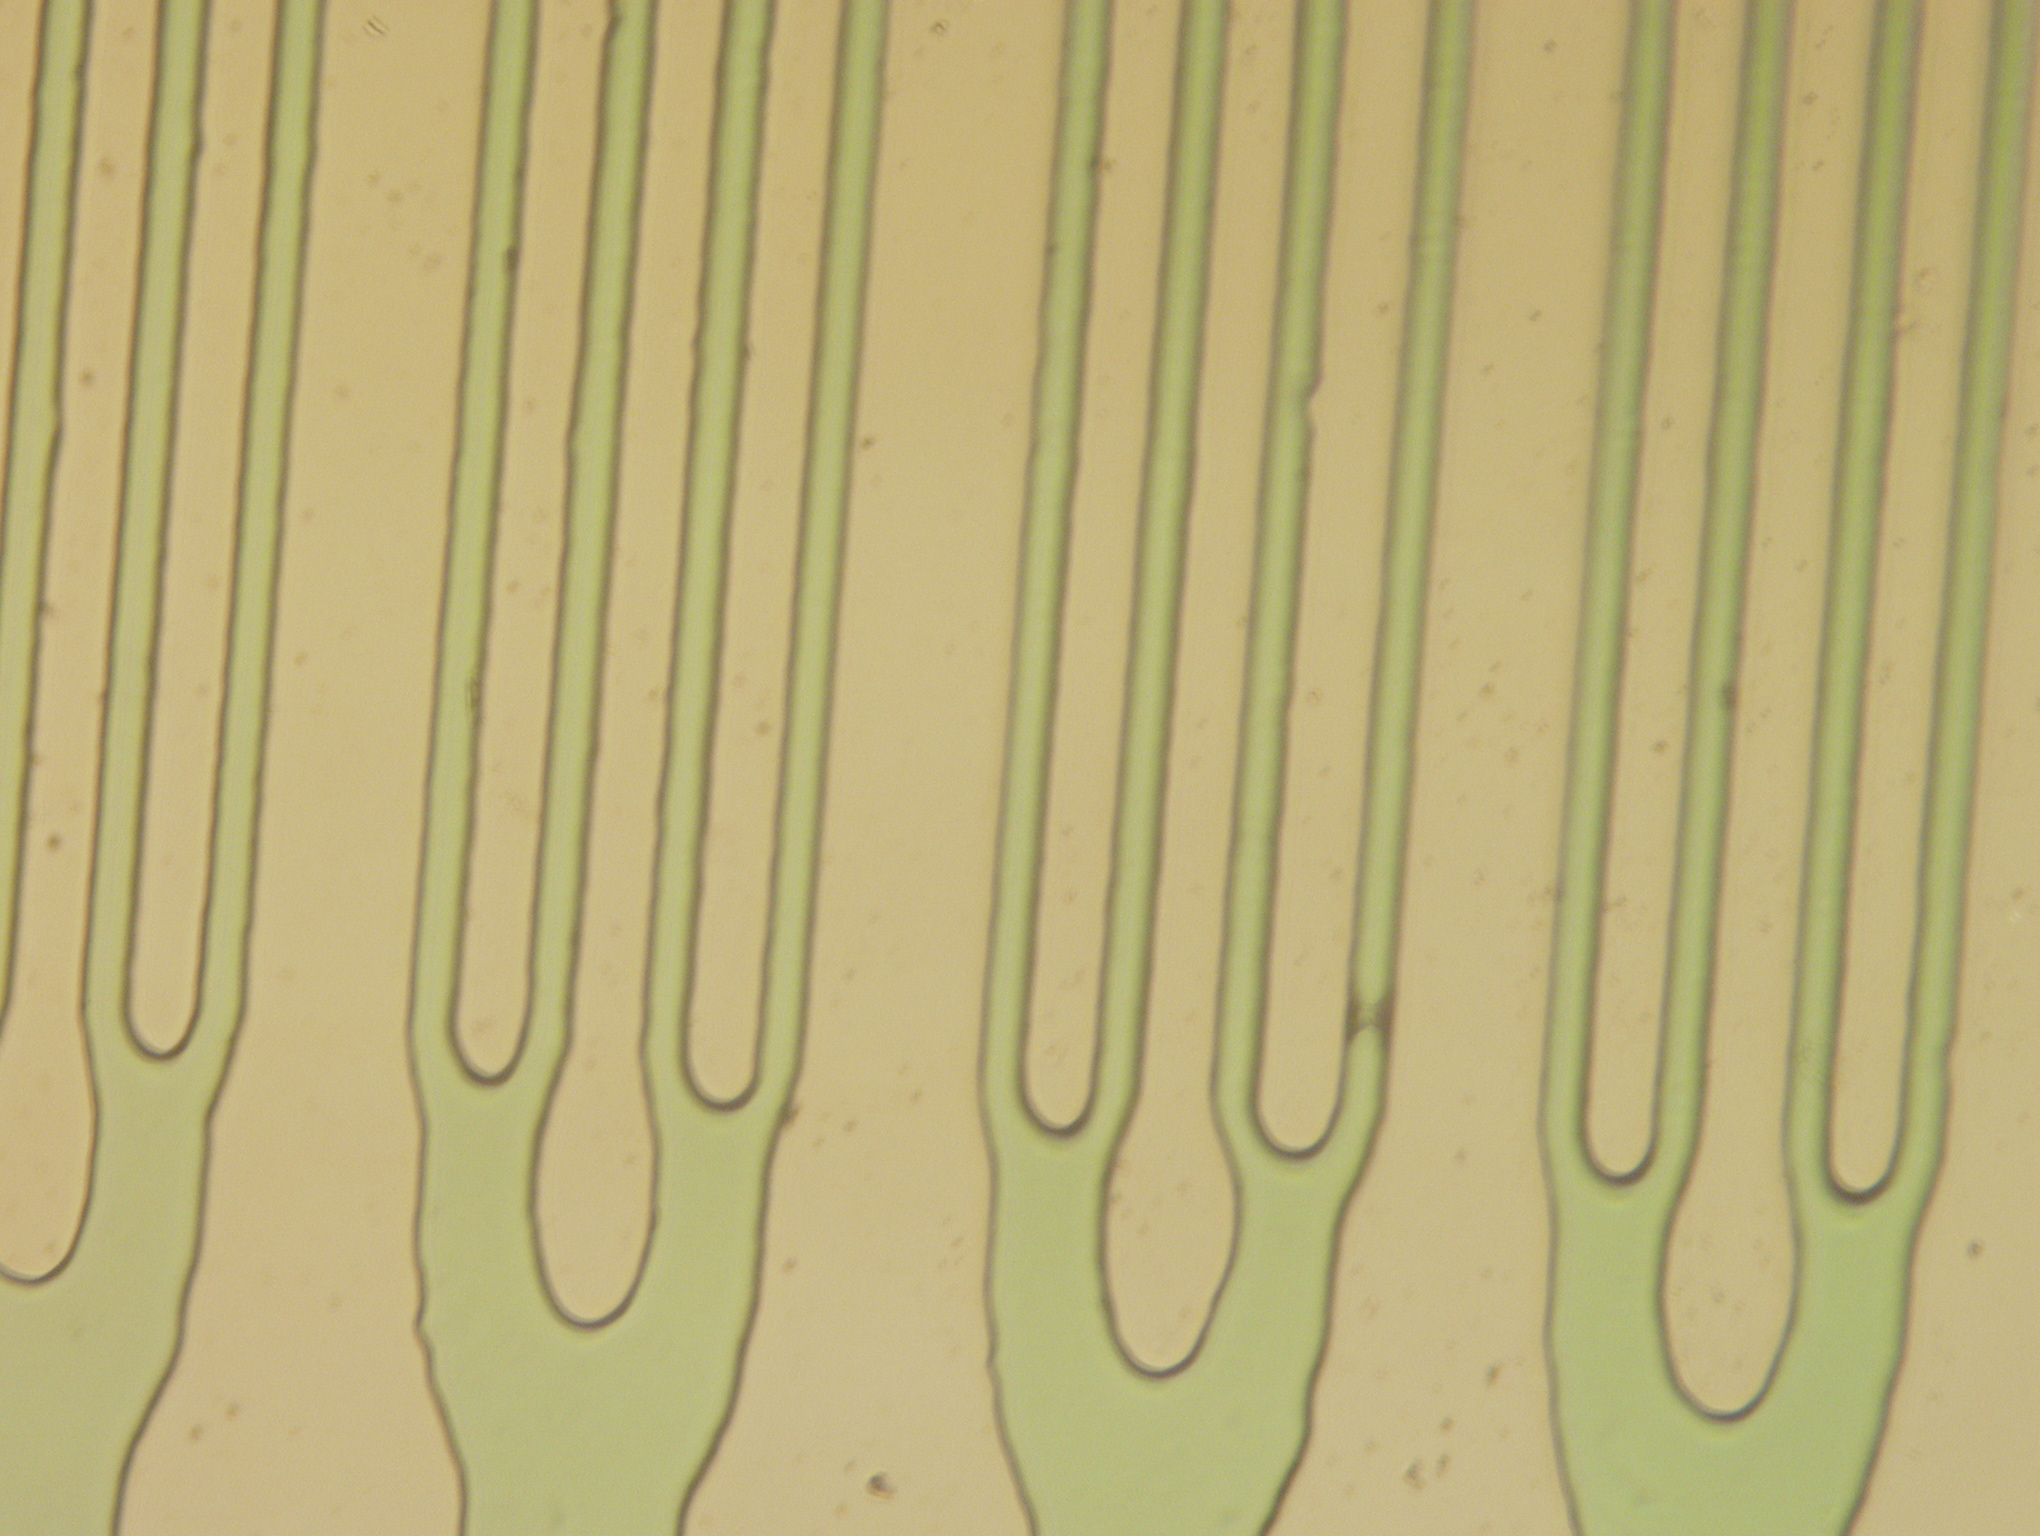 Example of microchannel capillaries